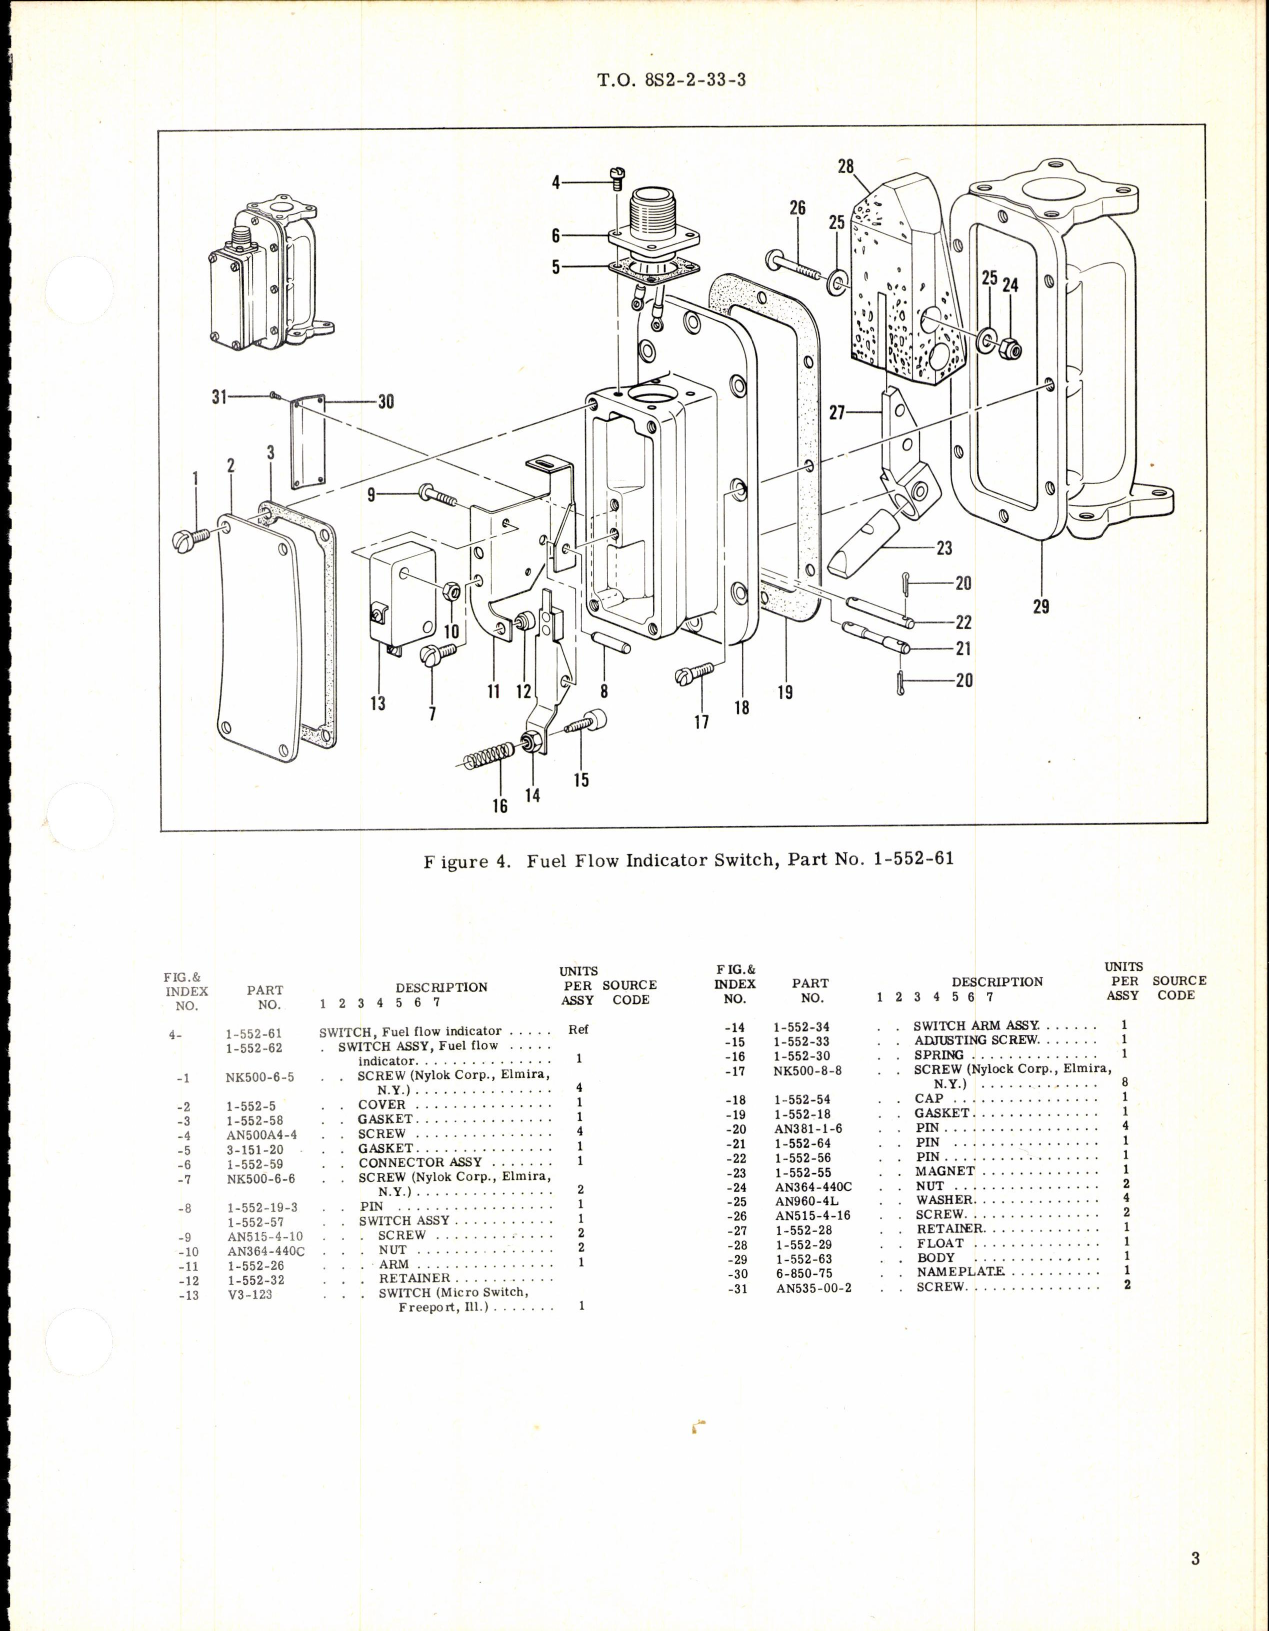 Sample page 3 from AirCorps Library document: Fuel Flow Indicator Switch Part No 1-552-61